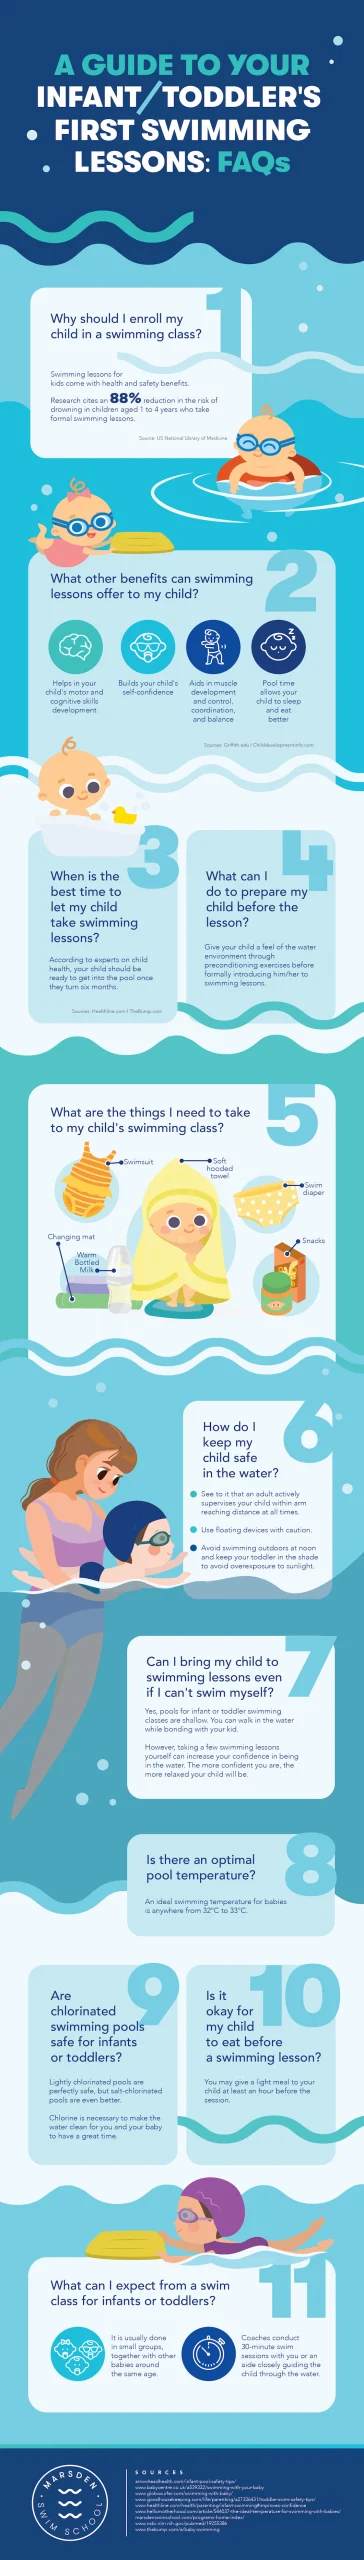 A Guide to Your Infant or Toddler’s First Swimming Lessons - Infographics